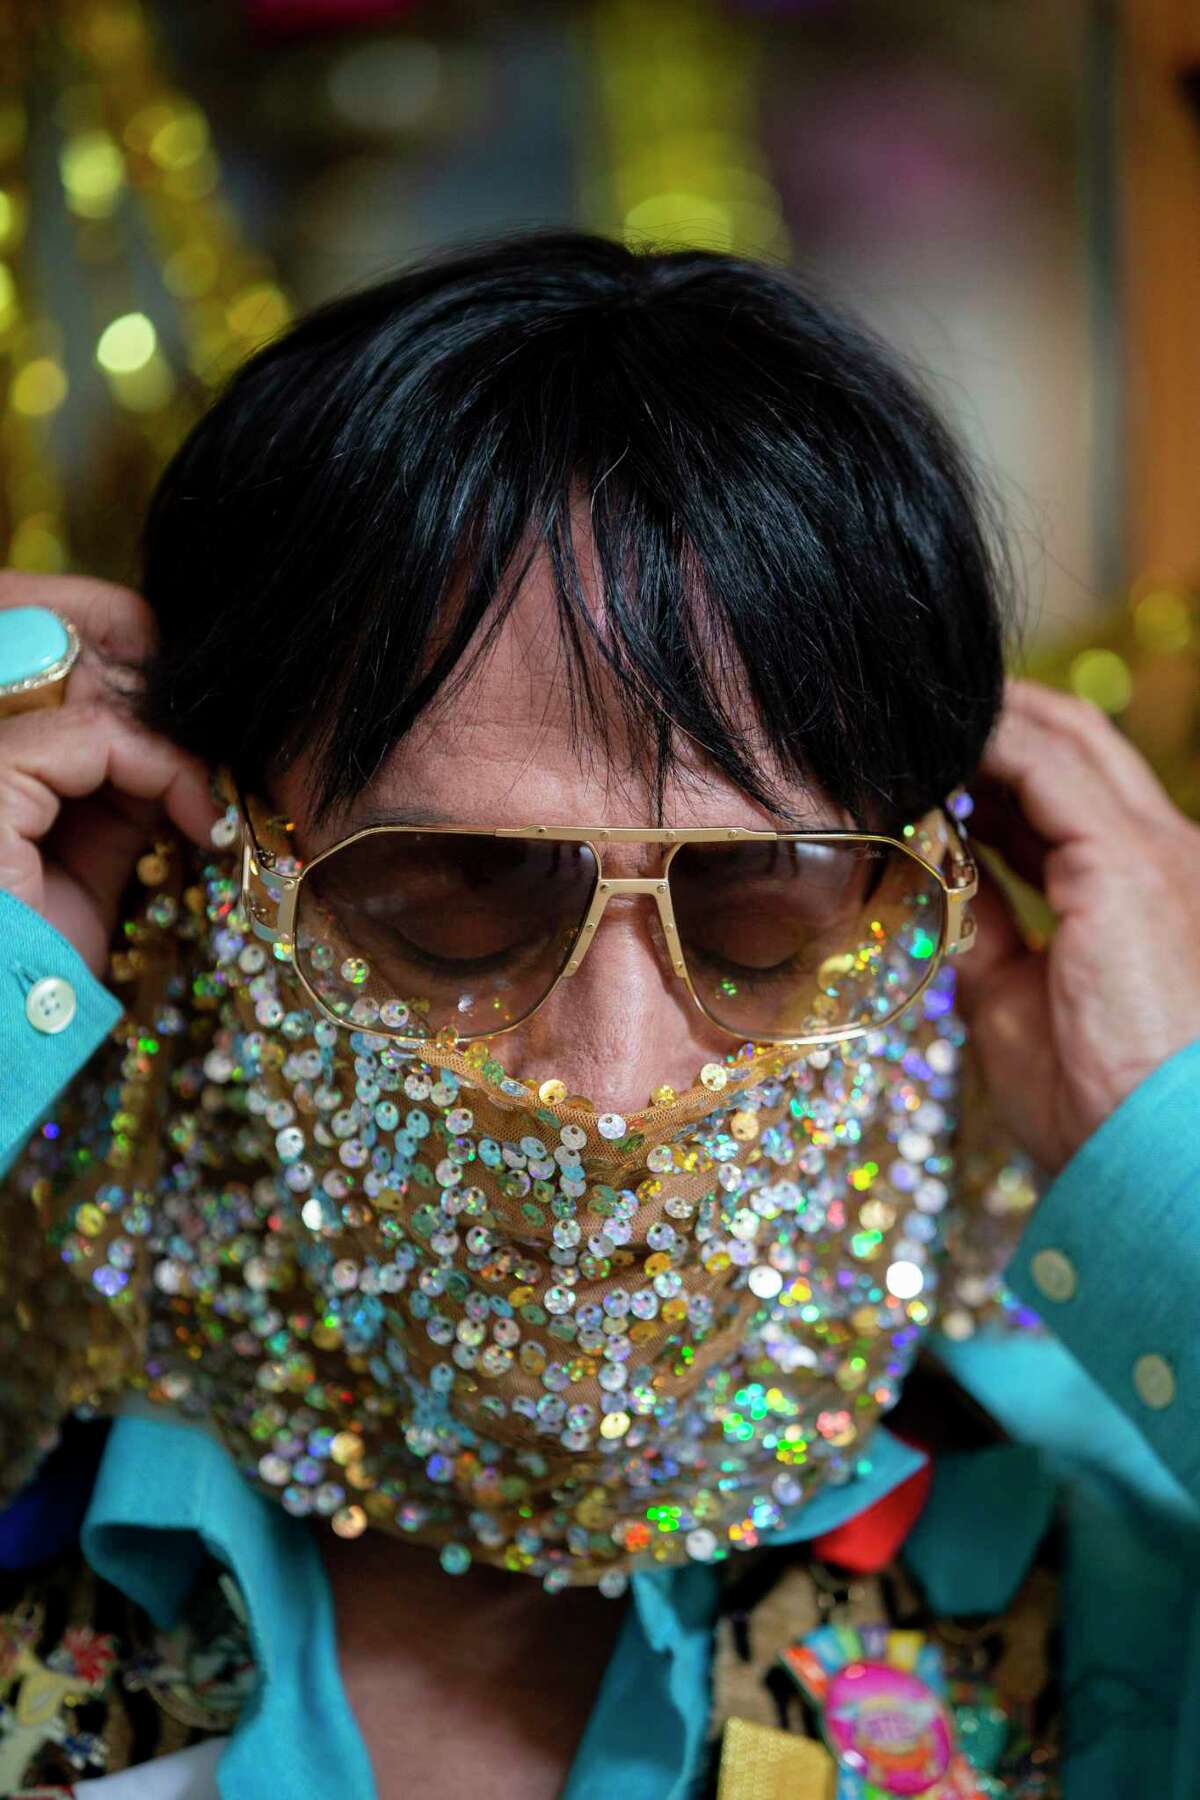 Karlos Anzoategui puts on a sequined scarf as a mask at his home. He has decided to celebrate Fiesta at home in his own ways. "I will not let COVID-19 take the Fiesta out of my life," he says. "Keep going, keep moving, keep doing!"